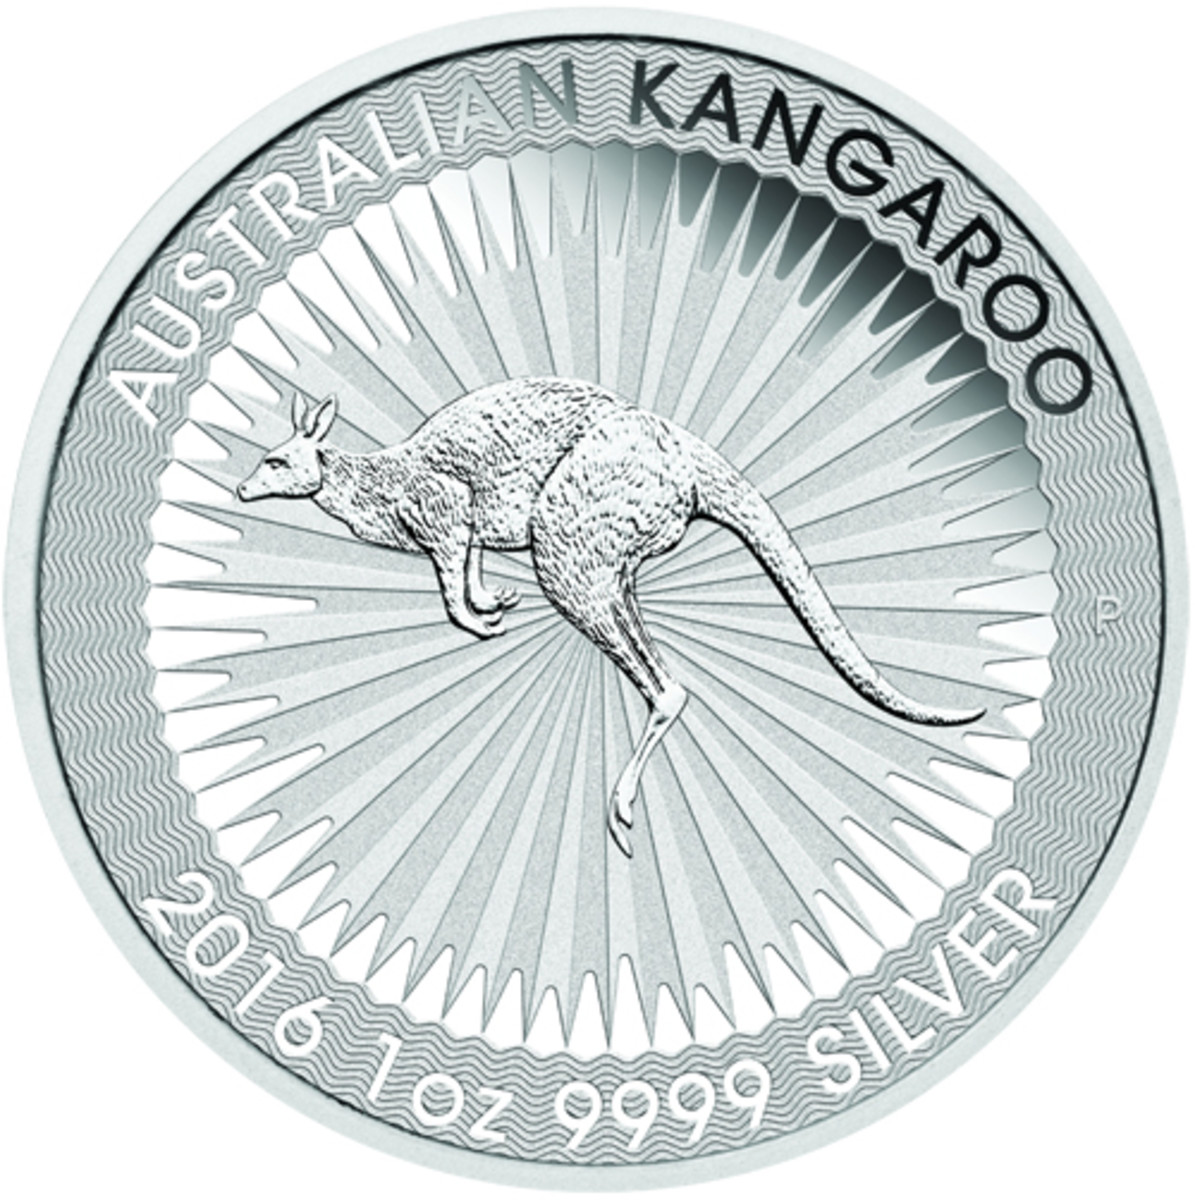 Buyers have snapped up 10 million 2016 silver kangaroo bullion dollars from the Perth Mint. (Image courtesy the Perth Mint.)